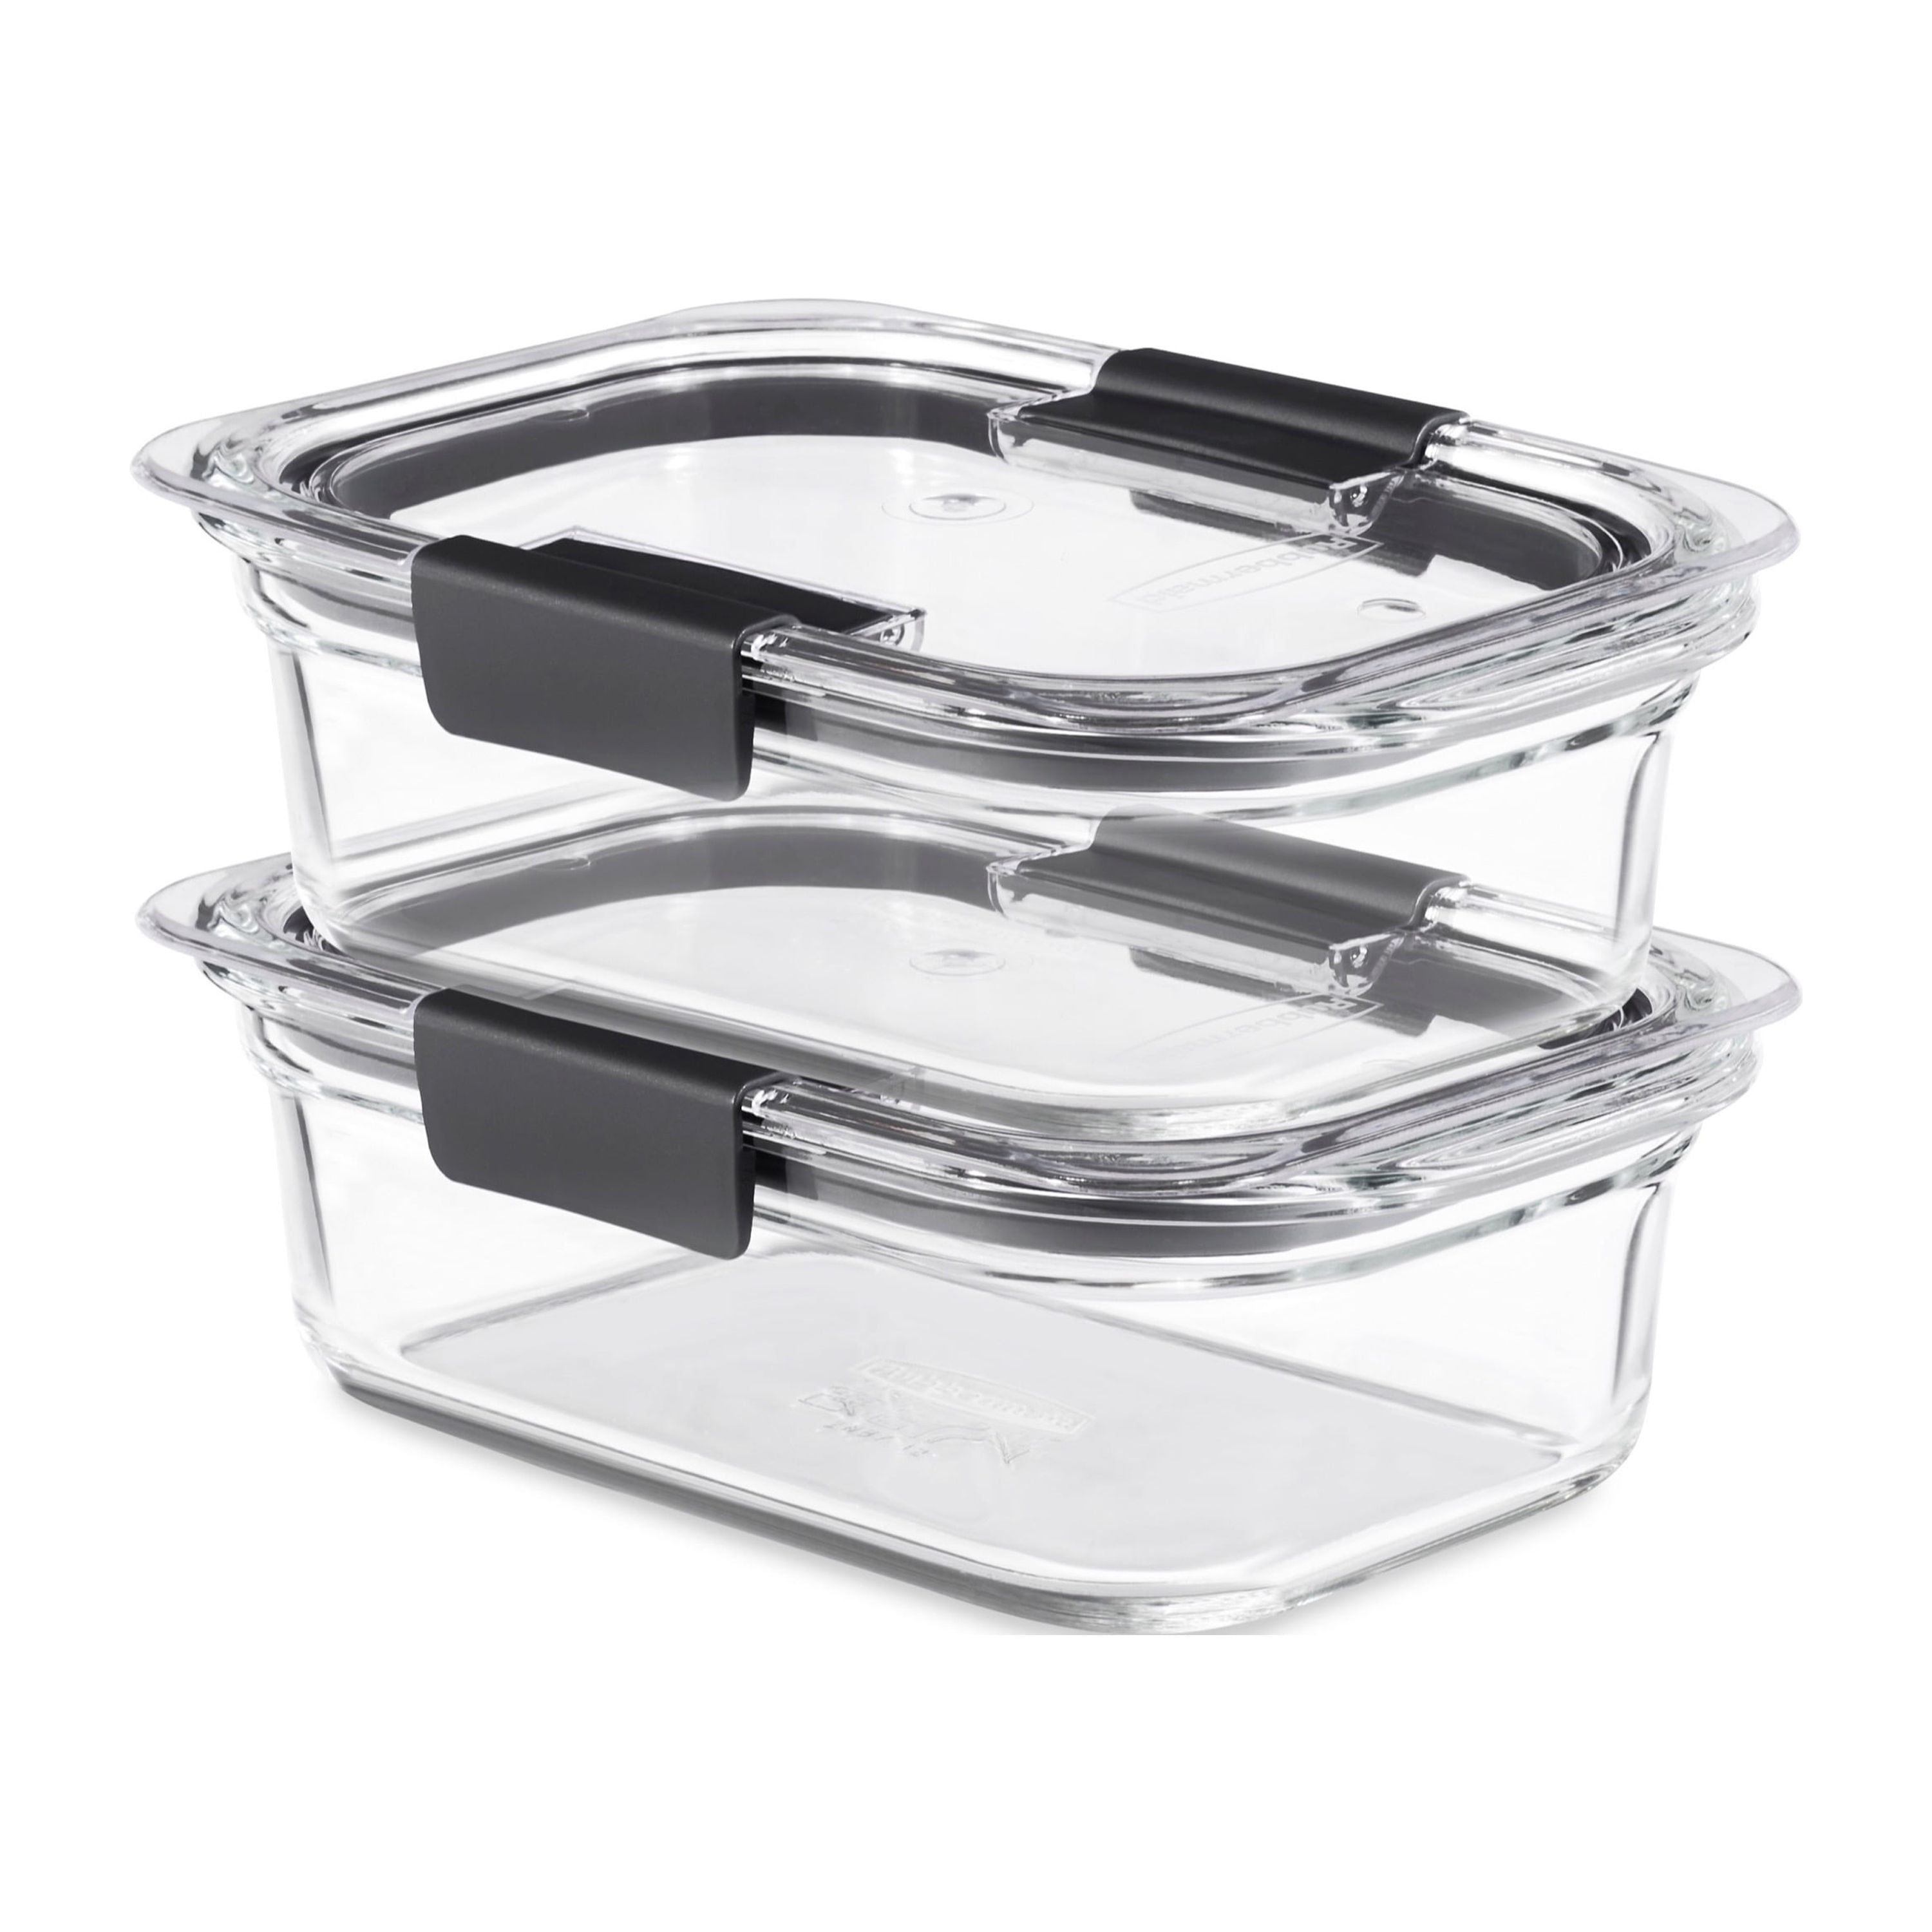 Rubbermaid 3.2 Cup Brilliance Glass Food Storage Containers, Set of 2